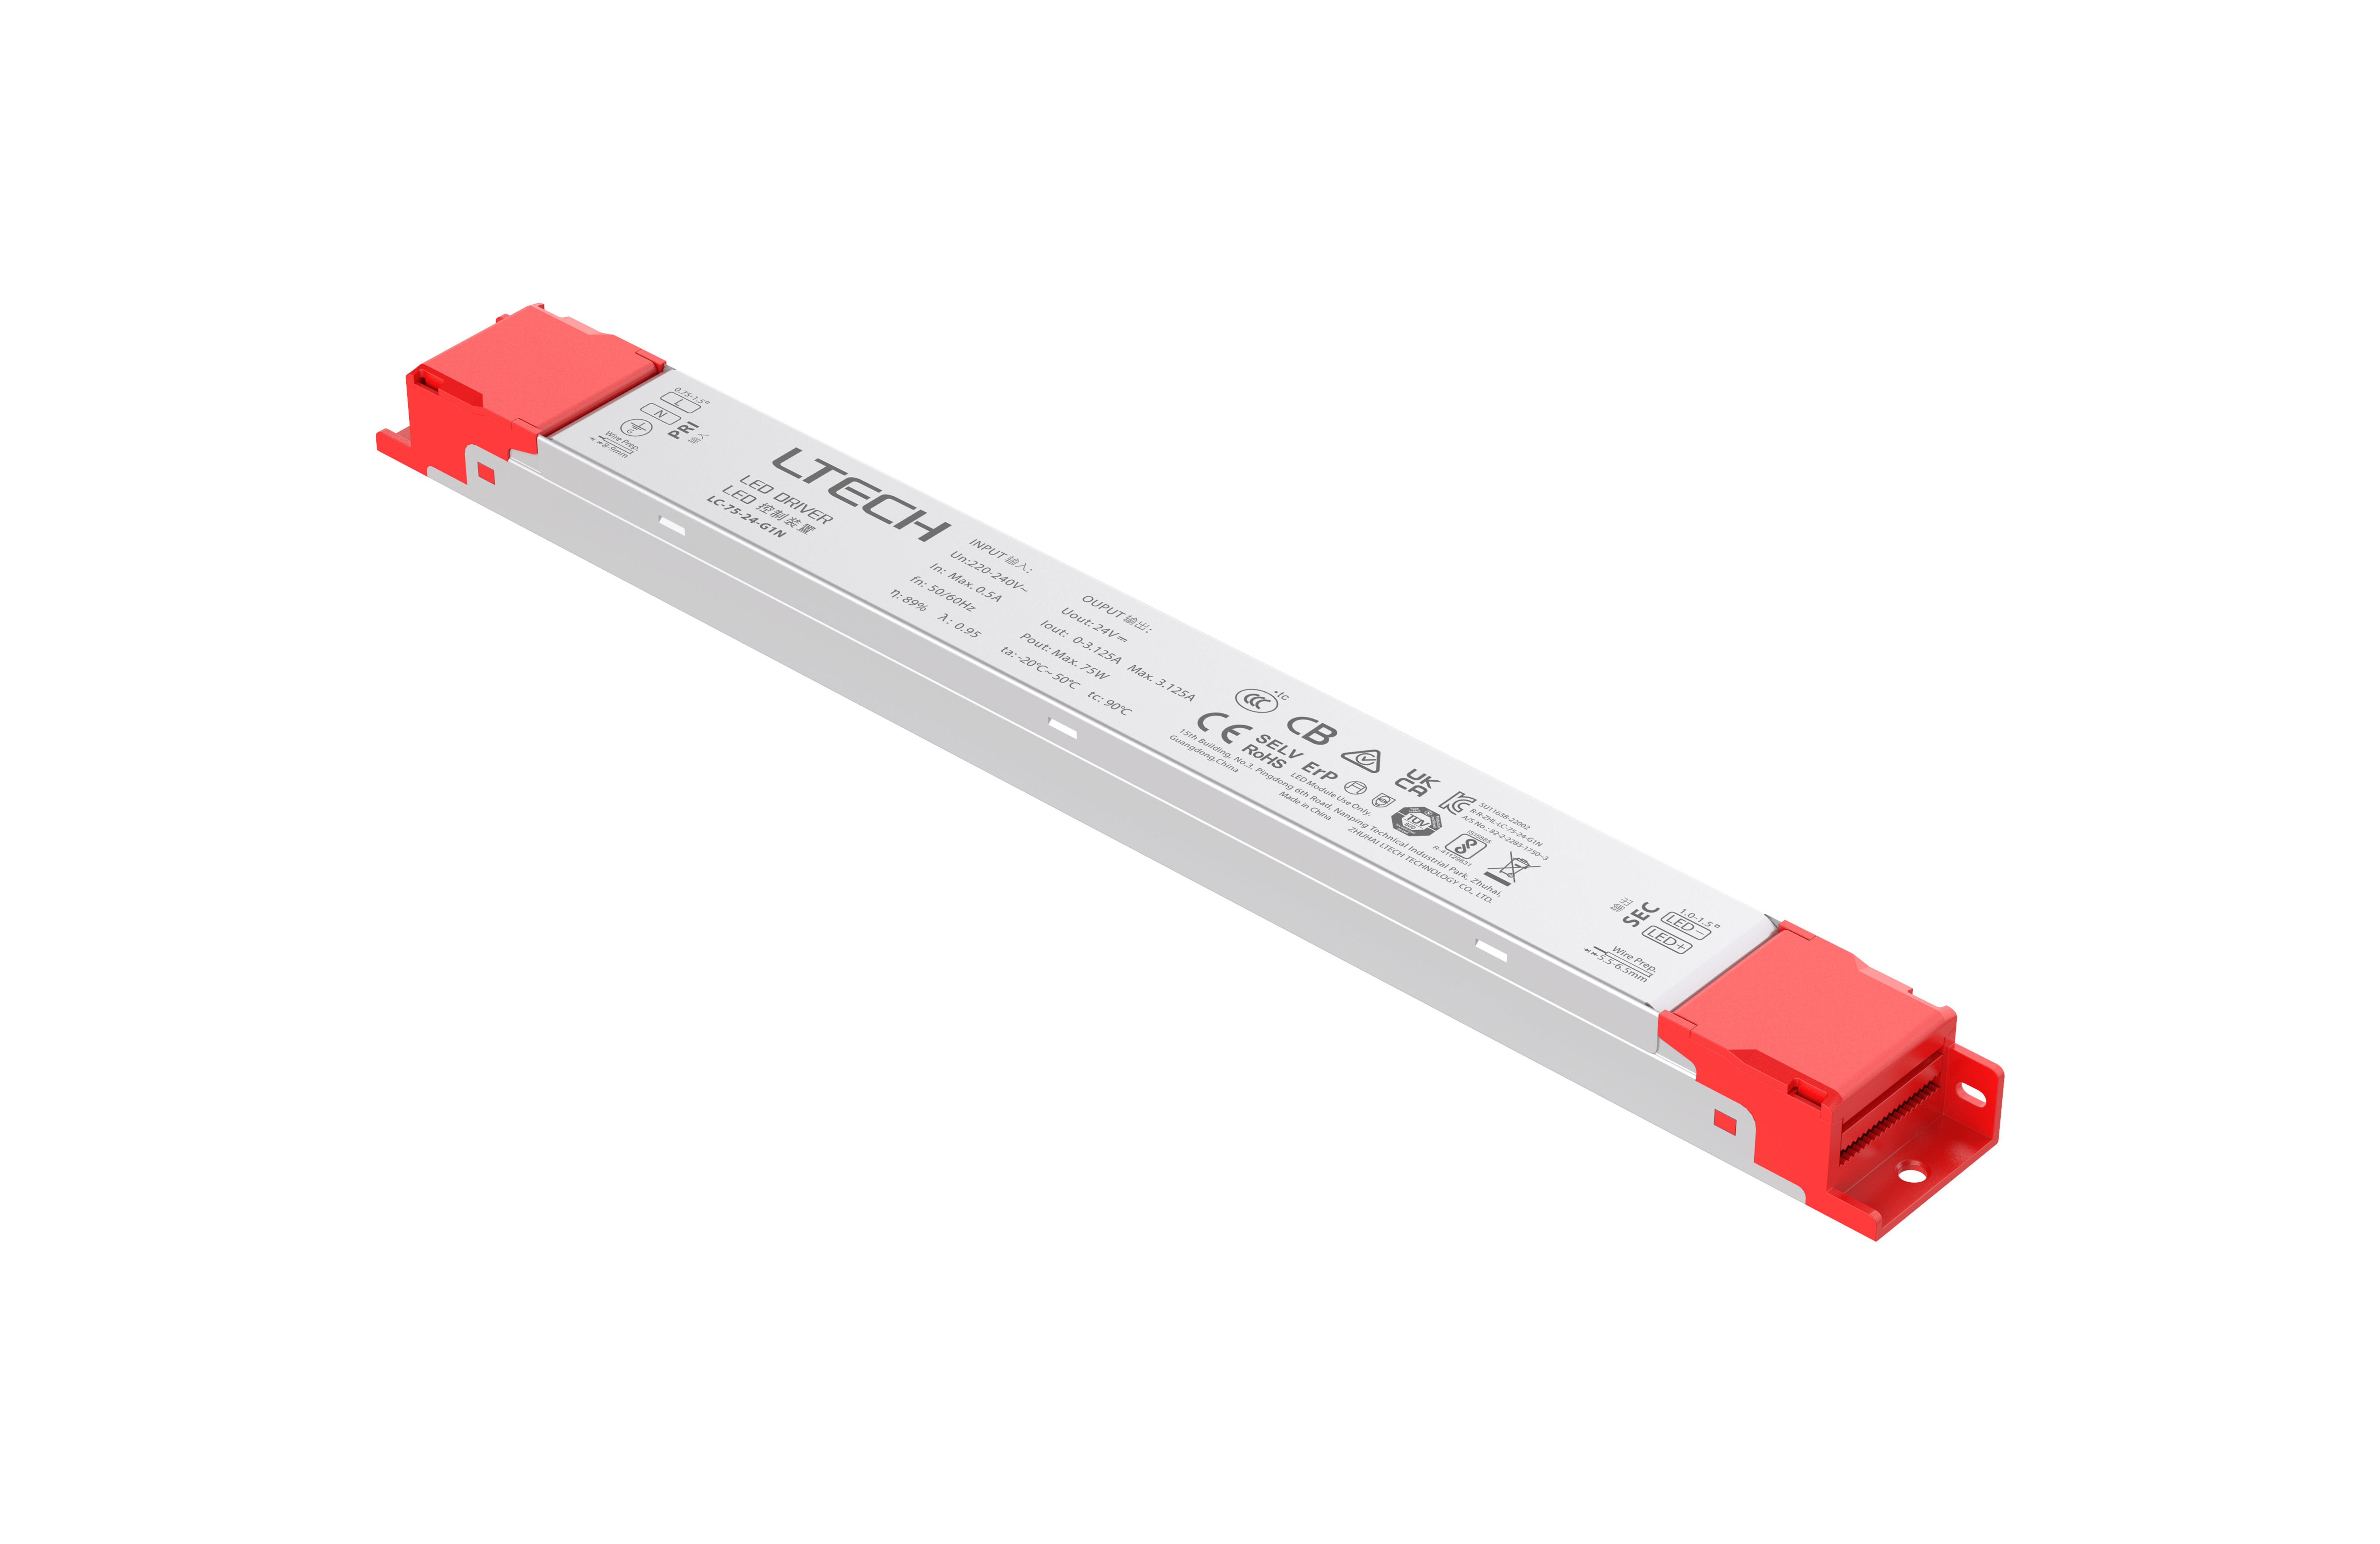 LC-75-24-G1N  Intelligent Constant Voltage  LED Driver, ON/OFF, 75W, 24VDC 3.125A , 220-240Vac, IP20, 5yrs Warrenty.